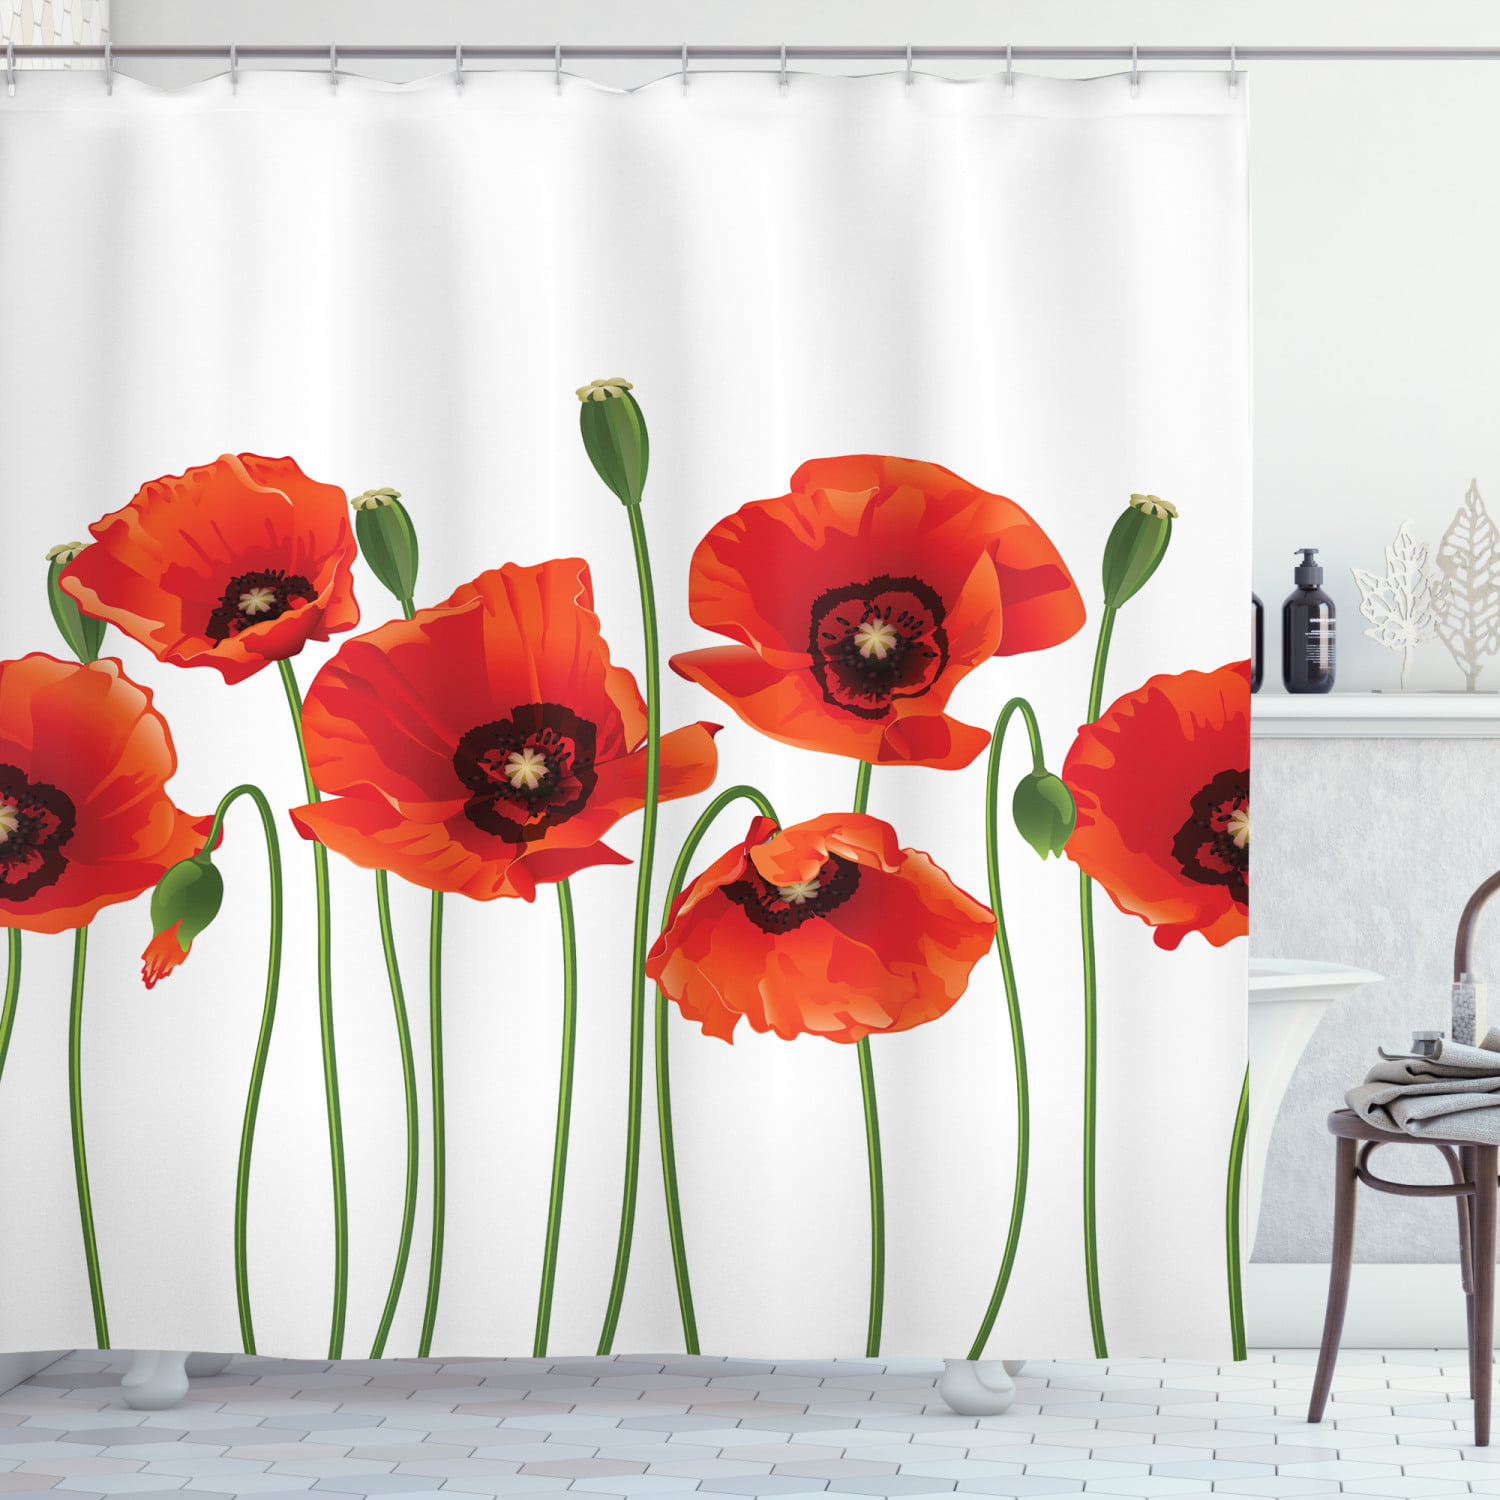 Poppies on the Painting Shower Curtain Bathroom Decor Fabric & 12hooks 71*71inch 